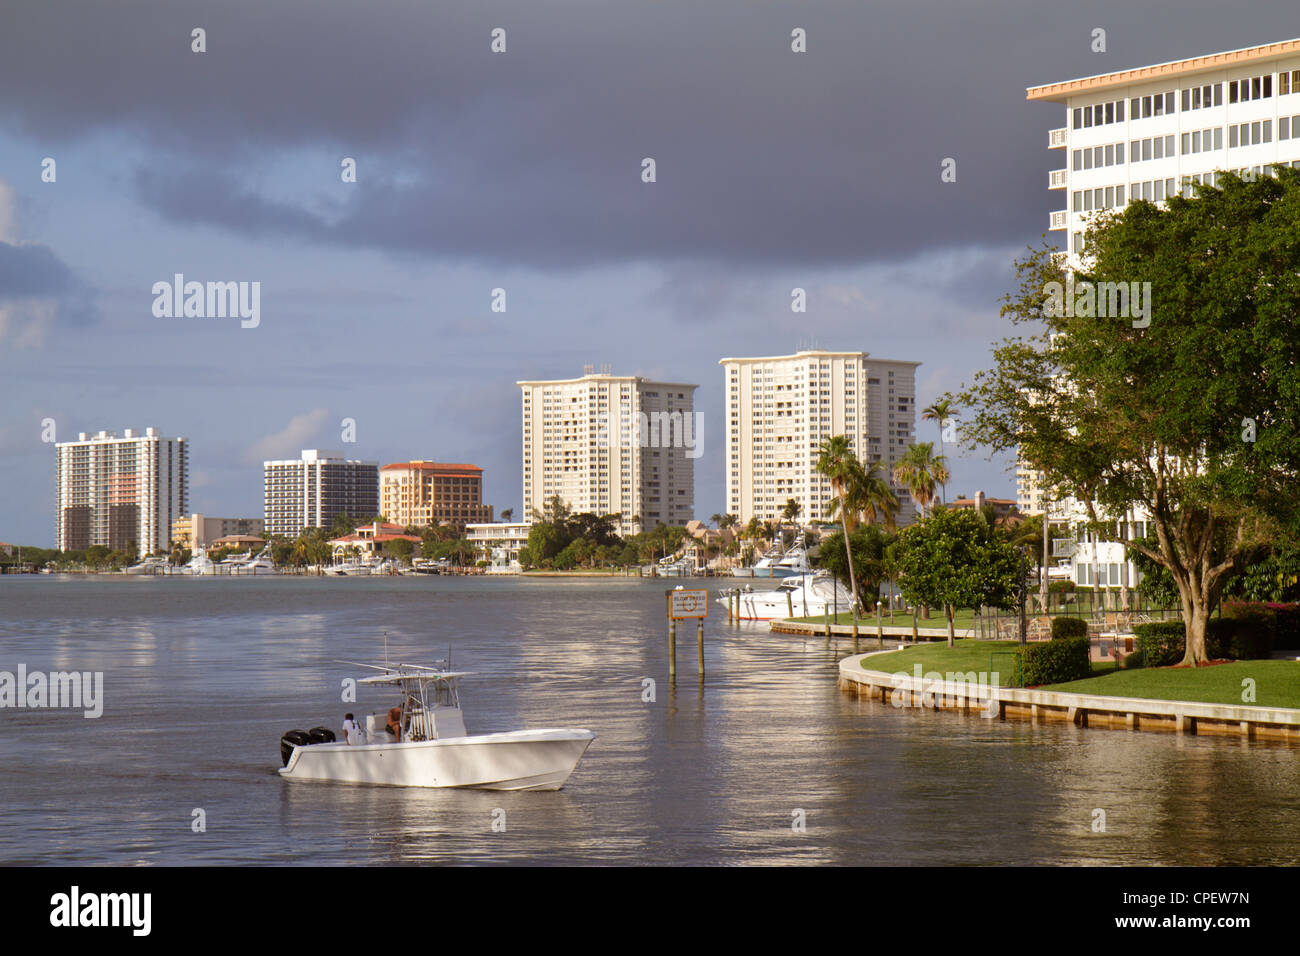 Boca Raton Florida,Palm Beach County,East Camino Real,Lake Palm Beach County,Boca Raton,Spanish River Water,Intracoastal Waterfront condominium buildi Banque D'Images